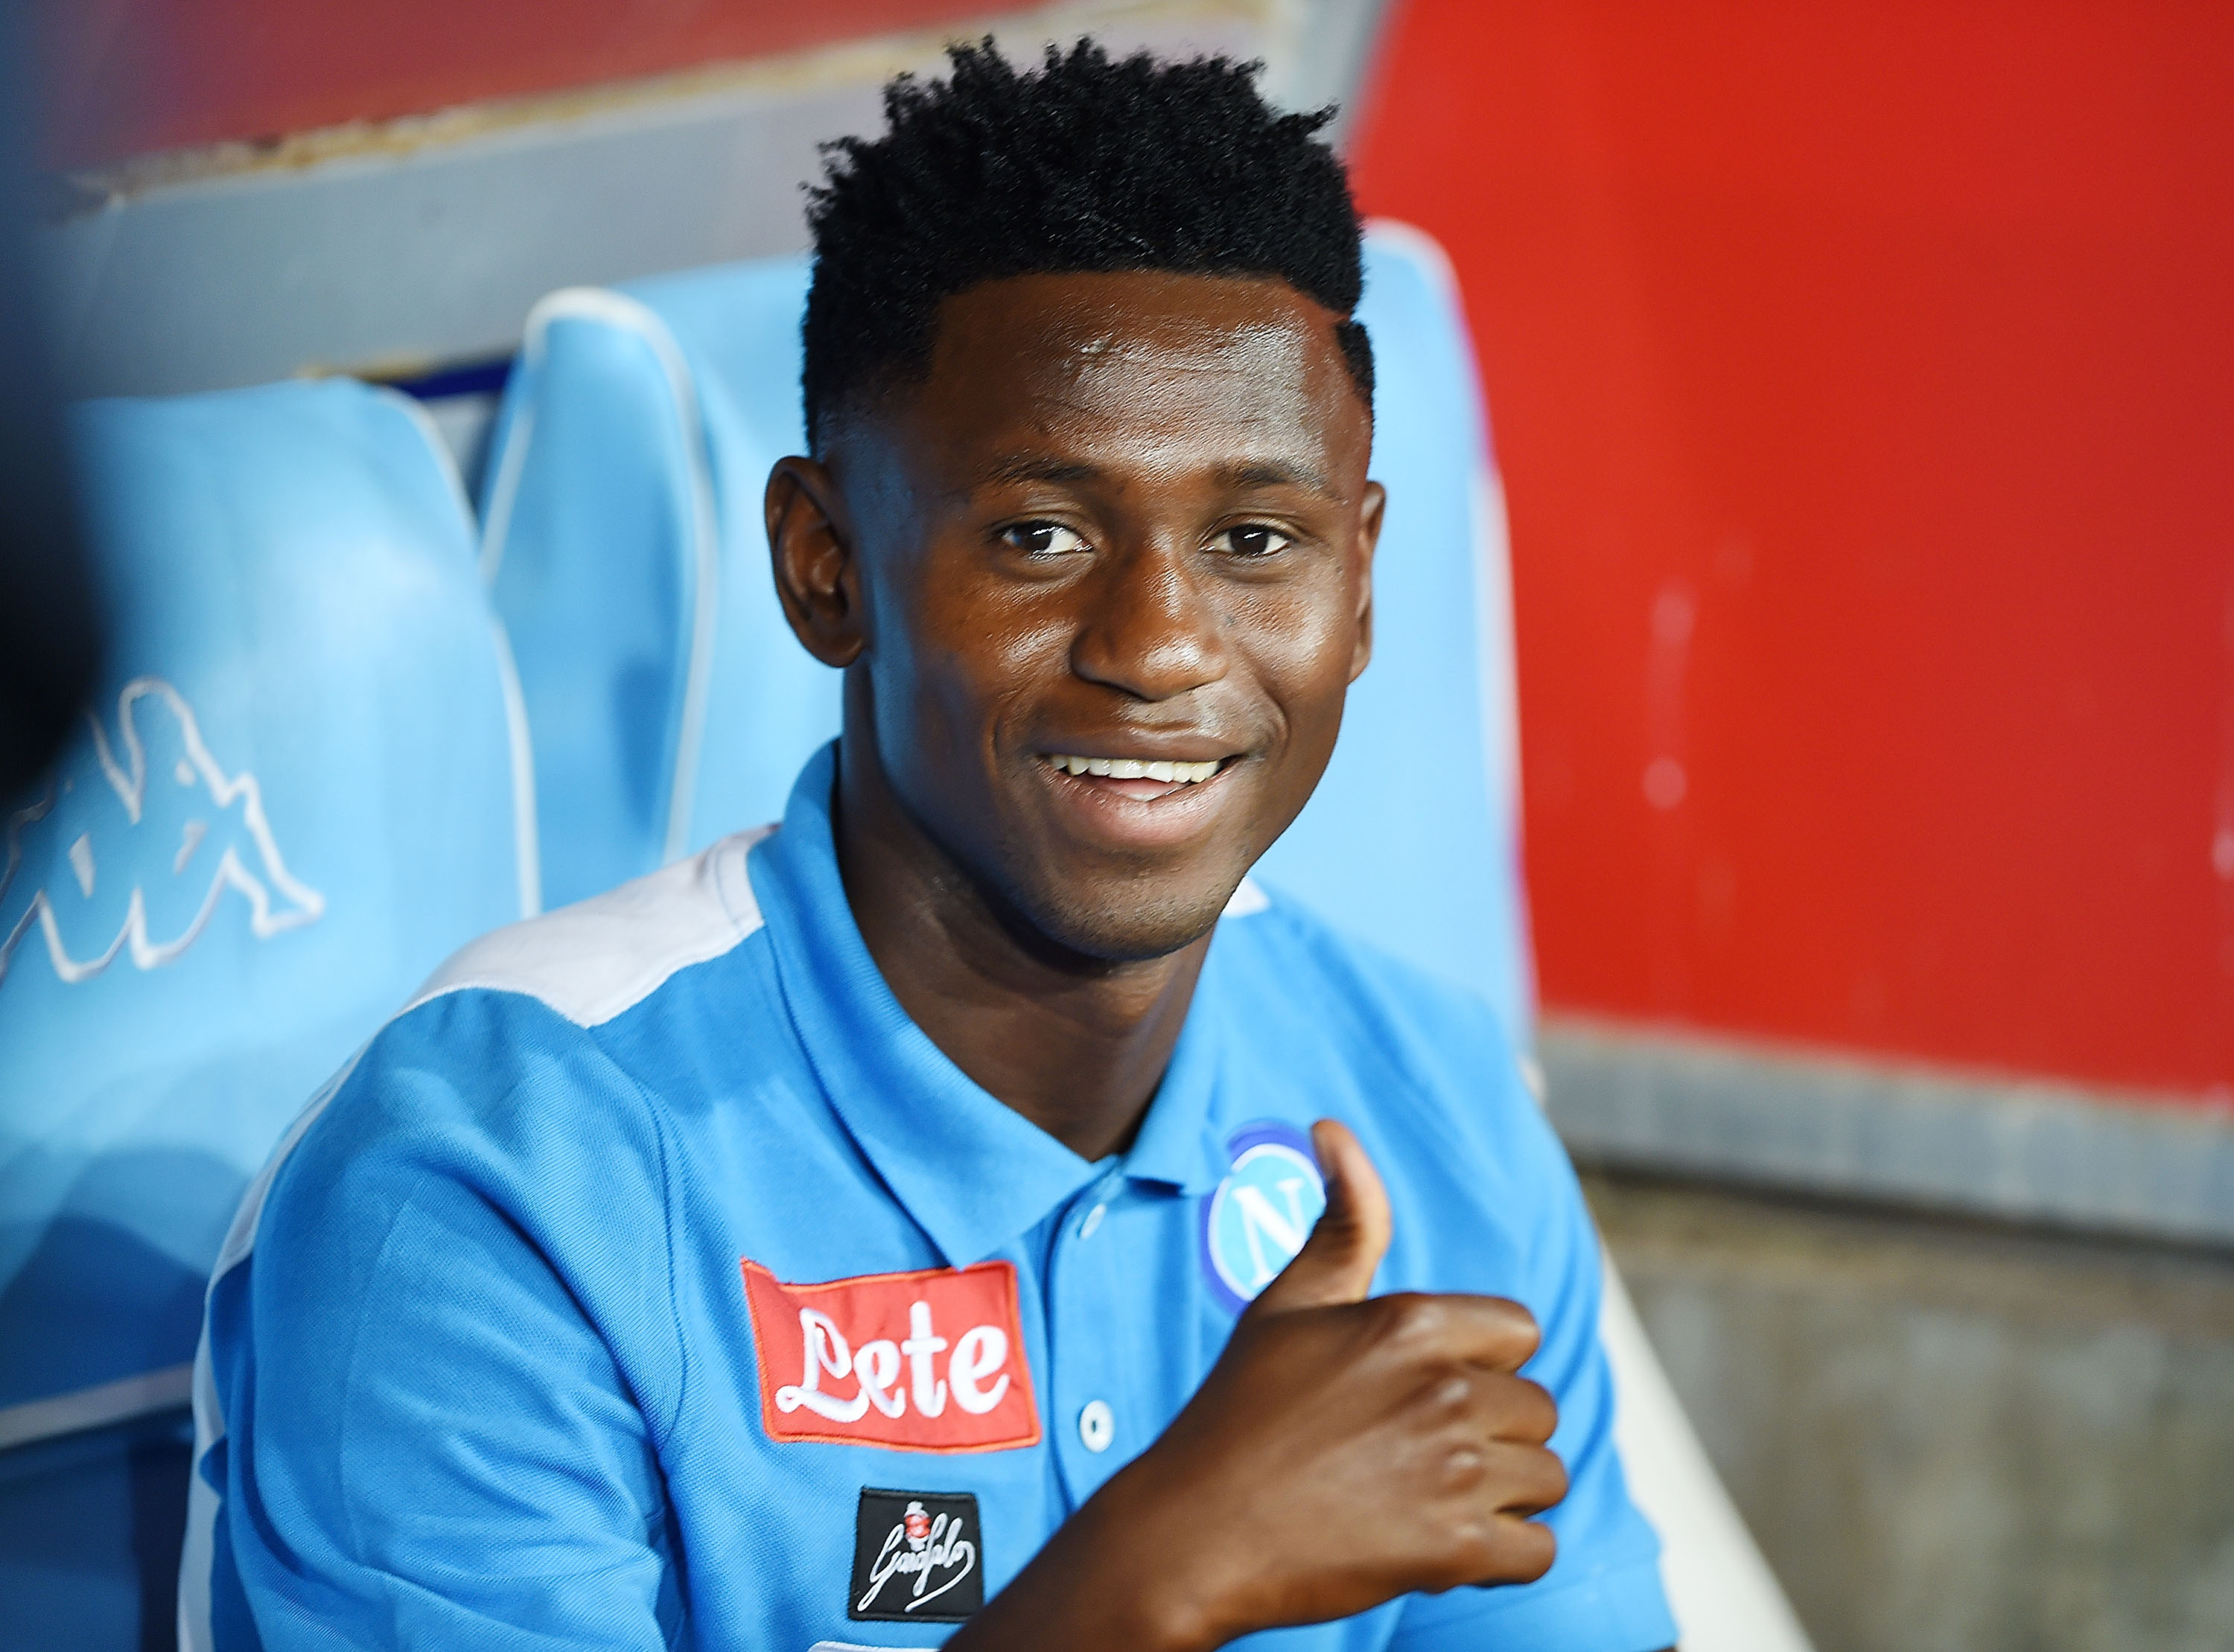 NAPLES, ITALY - AUGUST 27:  Amadou Diawara of Napoli on the bench before the Serie A match between SSC Napoli and AC Milan at Stadio San Paolo on August 27, 2016 in Naples, Italy.  (Photo by Francesco Pecoraro/Getty Images)